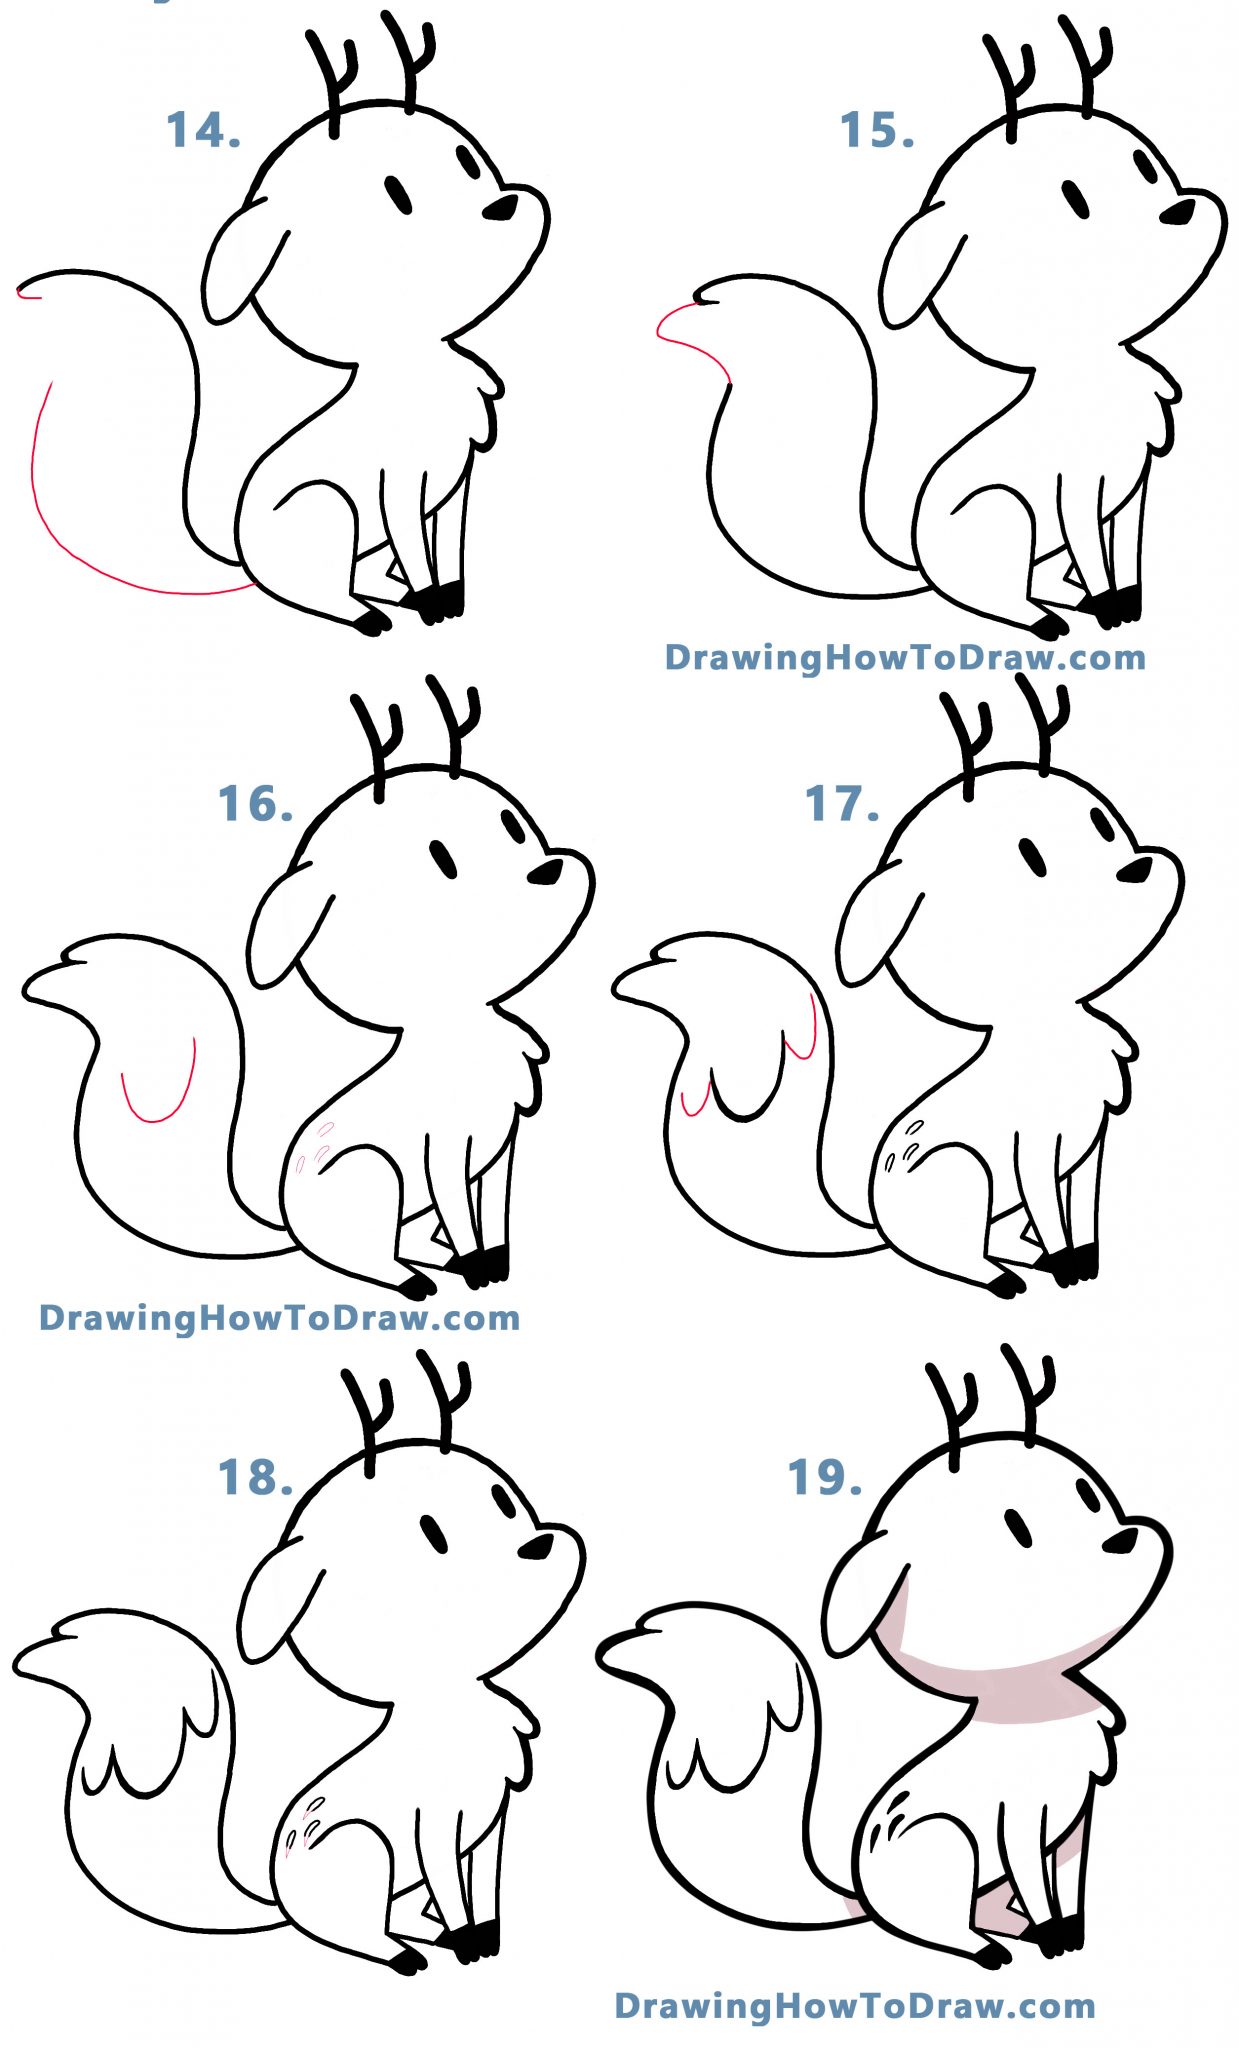 How to Draw Twig the Deerfox from Hilda Easy Step by Step Drawing